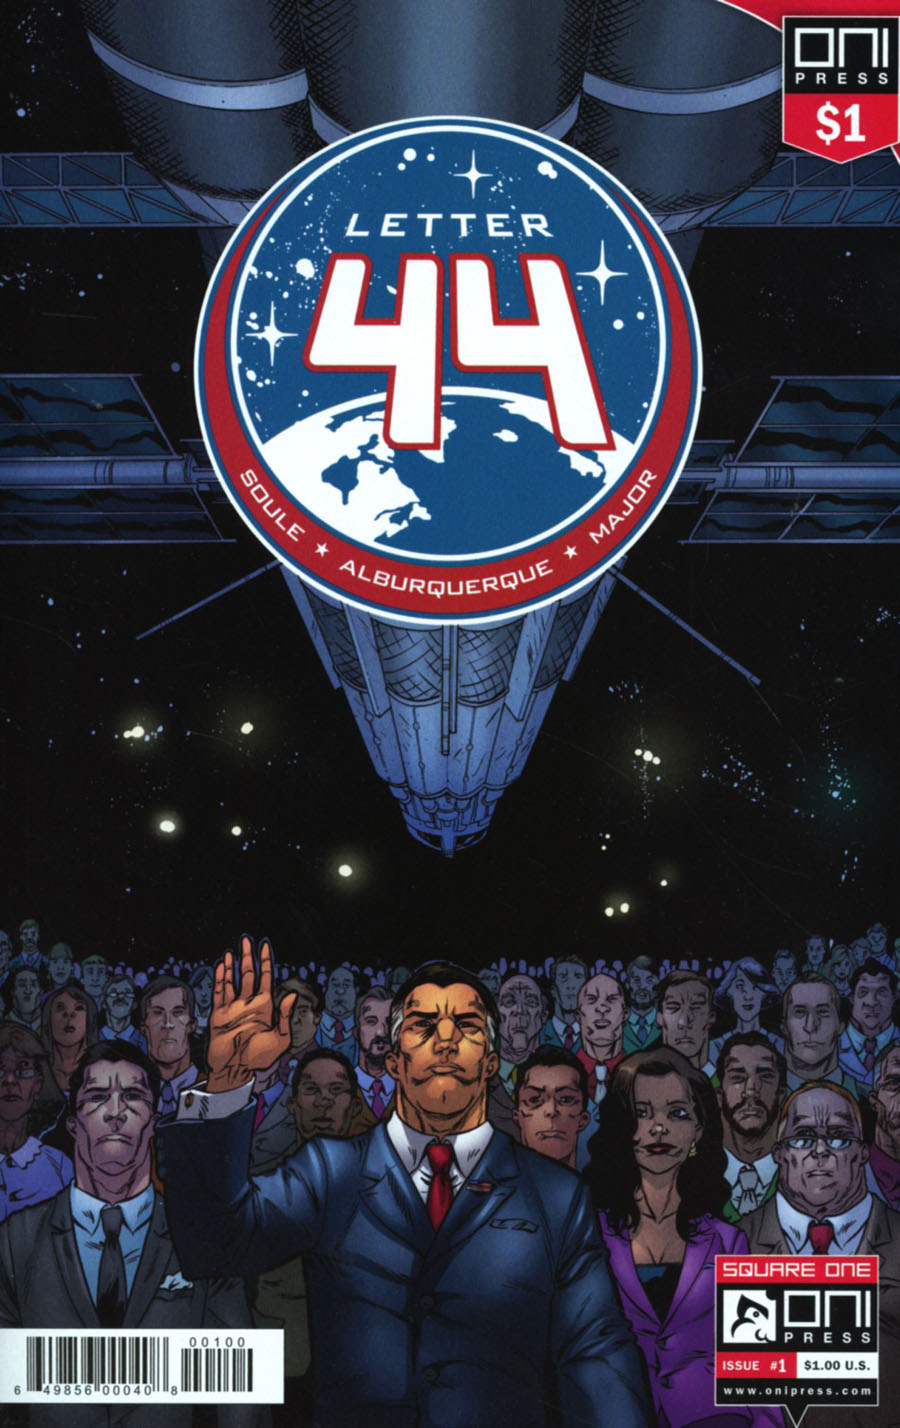 Letter 44 #1 Cover C 1 Dollar Edition